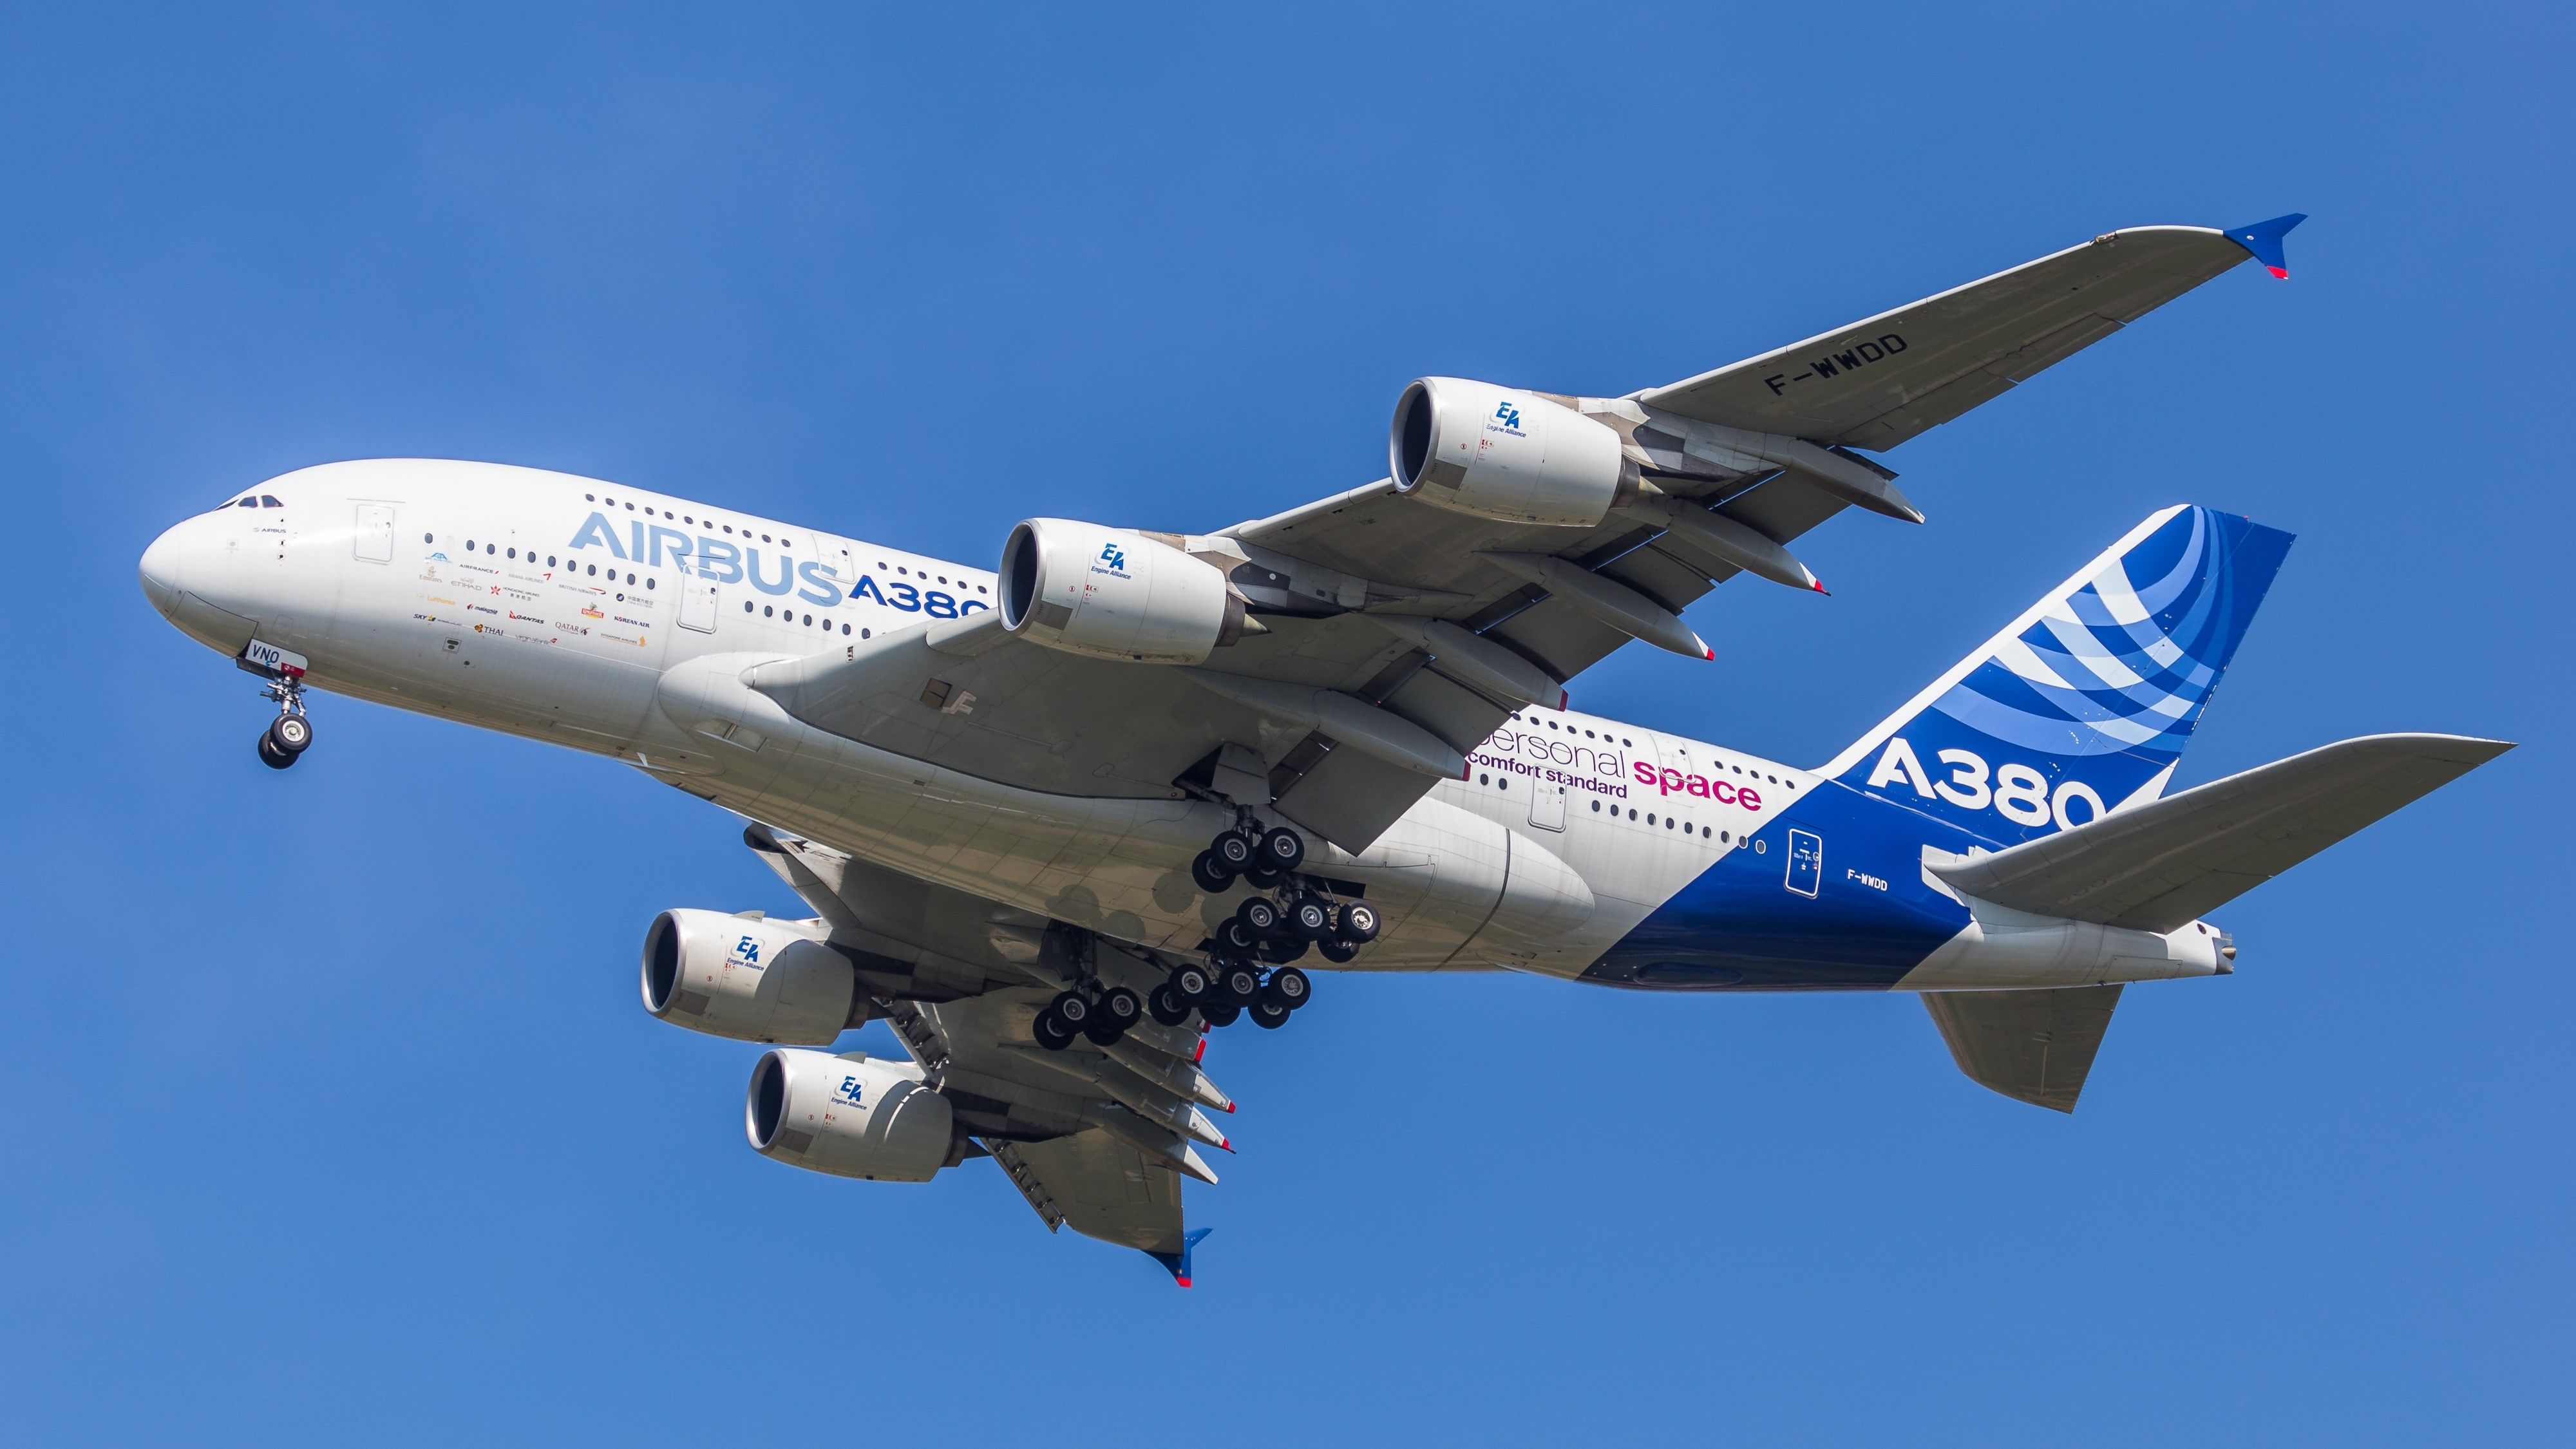 An Airbus A380 in house livery flying in the sky.